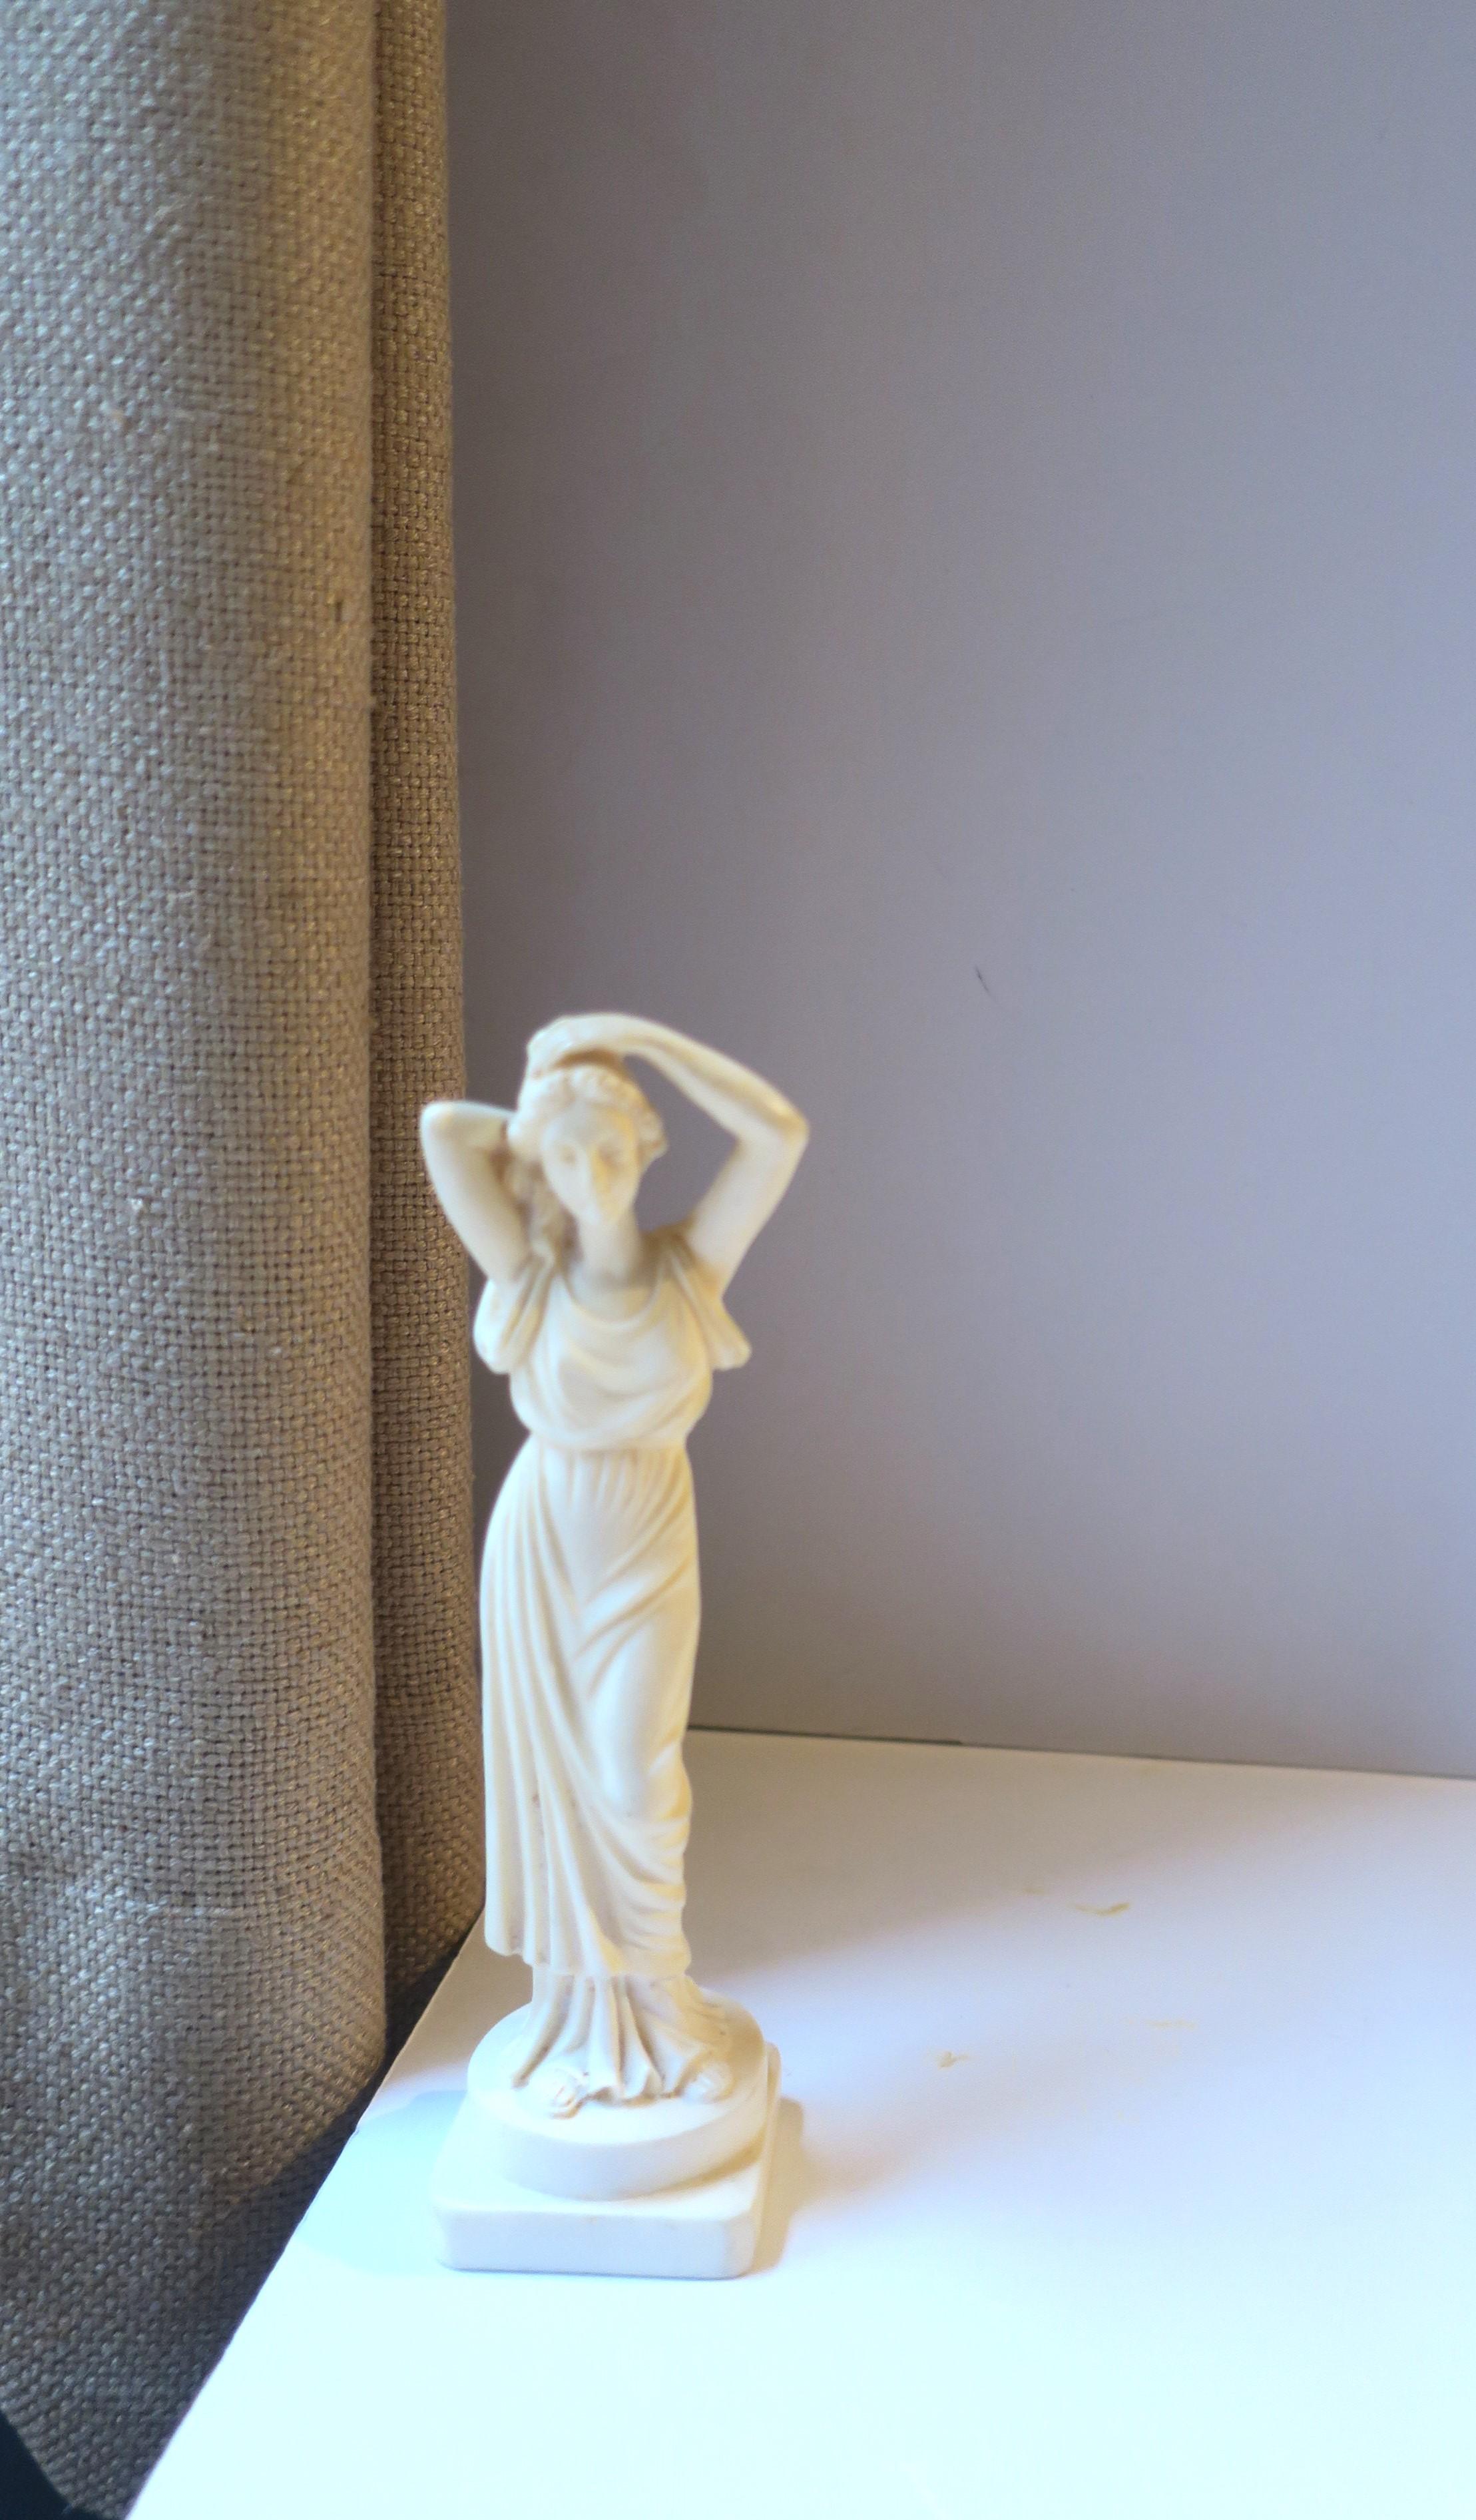 Italian Neoclassical Female Resin Sculpture Statue Decorative Object, Small In Good Condition For Sale In New York, NY